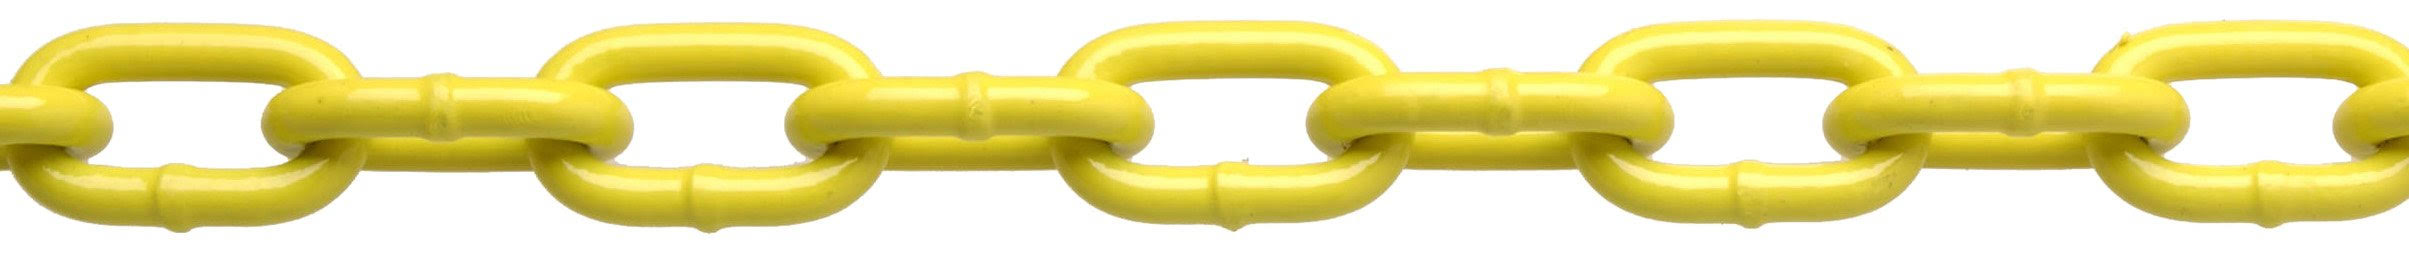 Campbell PD0725027 System 3 Grade 30 Low Carbon Steel Proof Coil Chain - Yellow Polycoated, 3/16", 100'